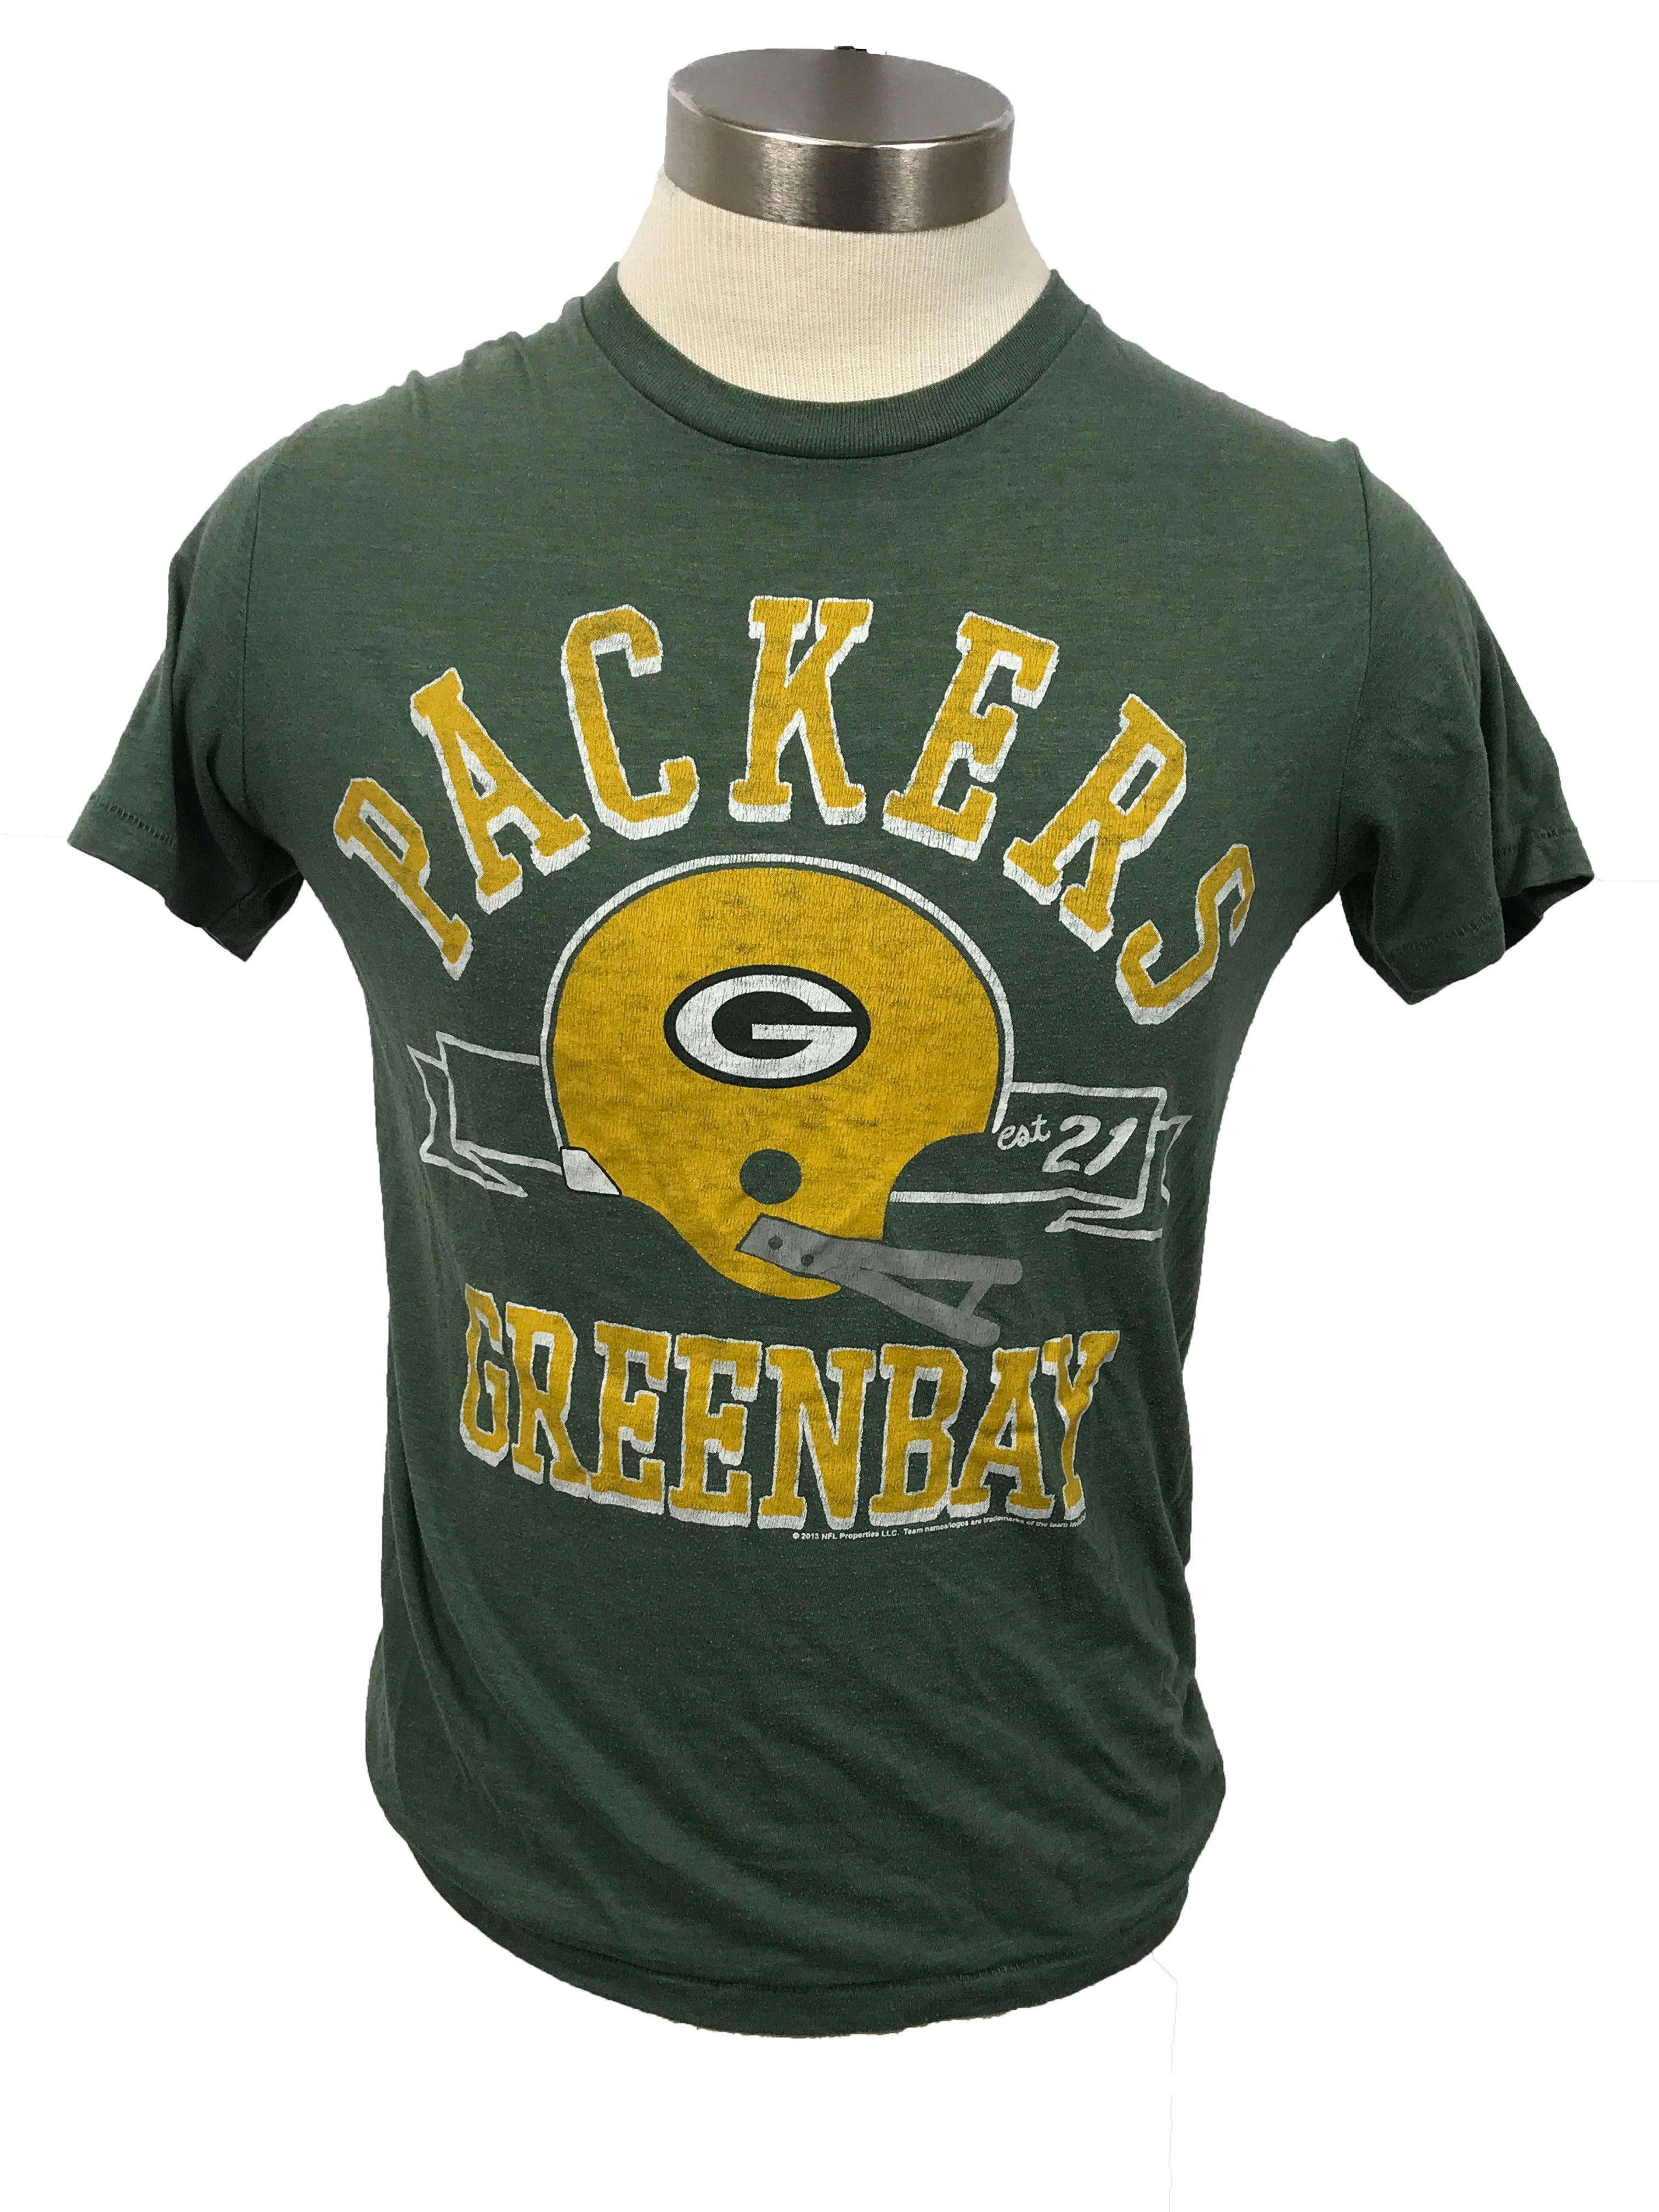 Green Bay Packers Green T-Shirt Unisex Size S